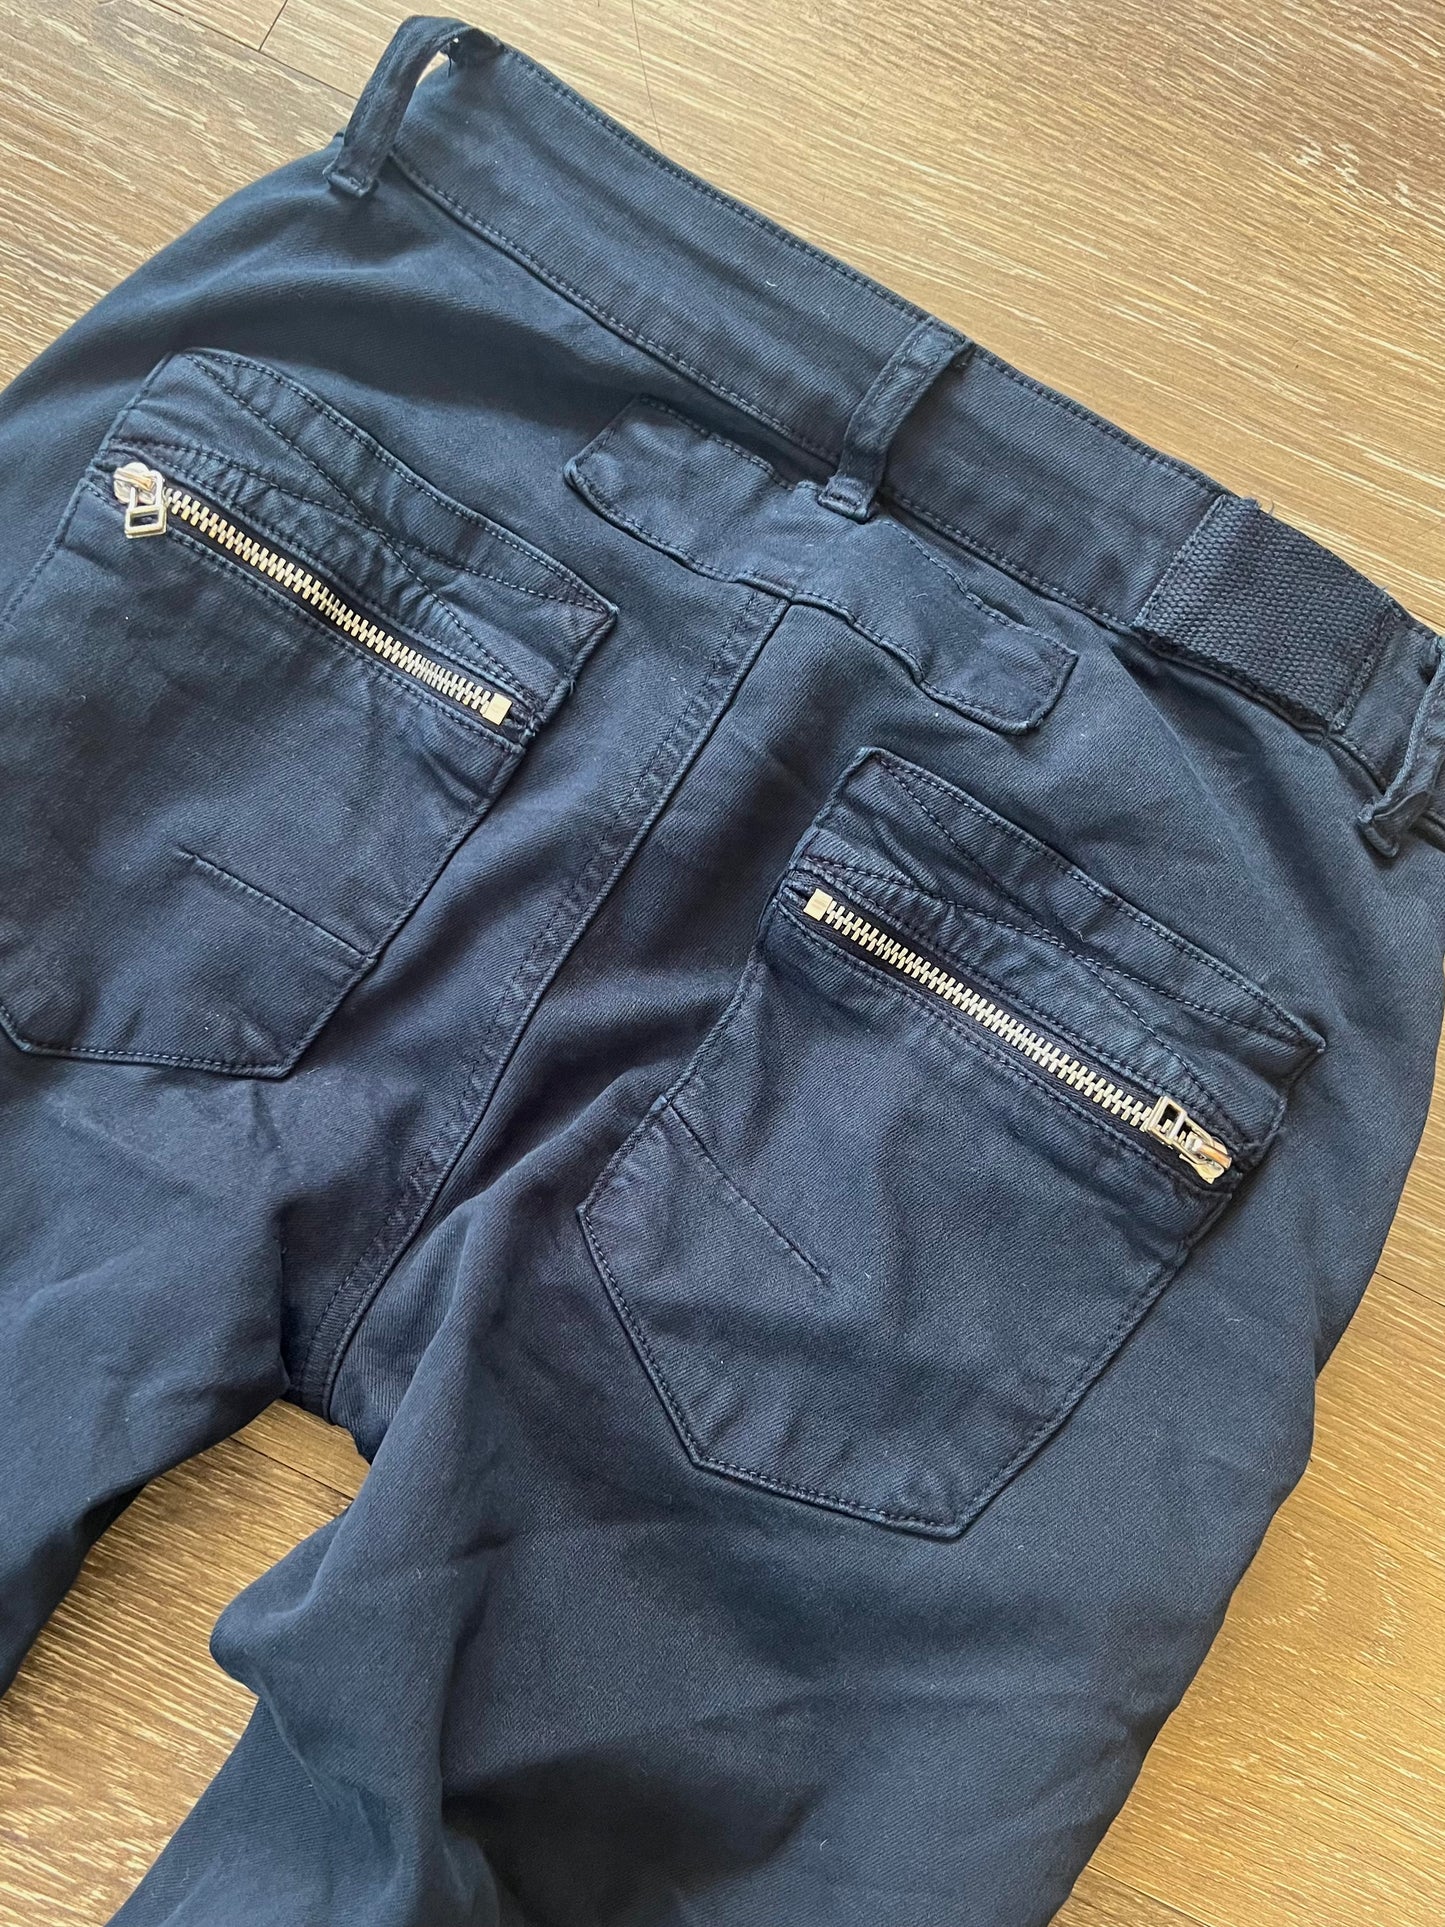 Melly & Co Navy/Black Jeans